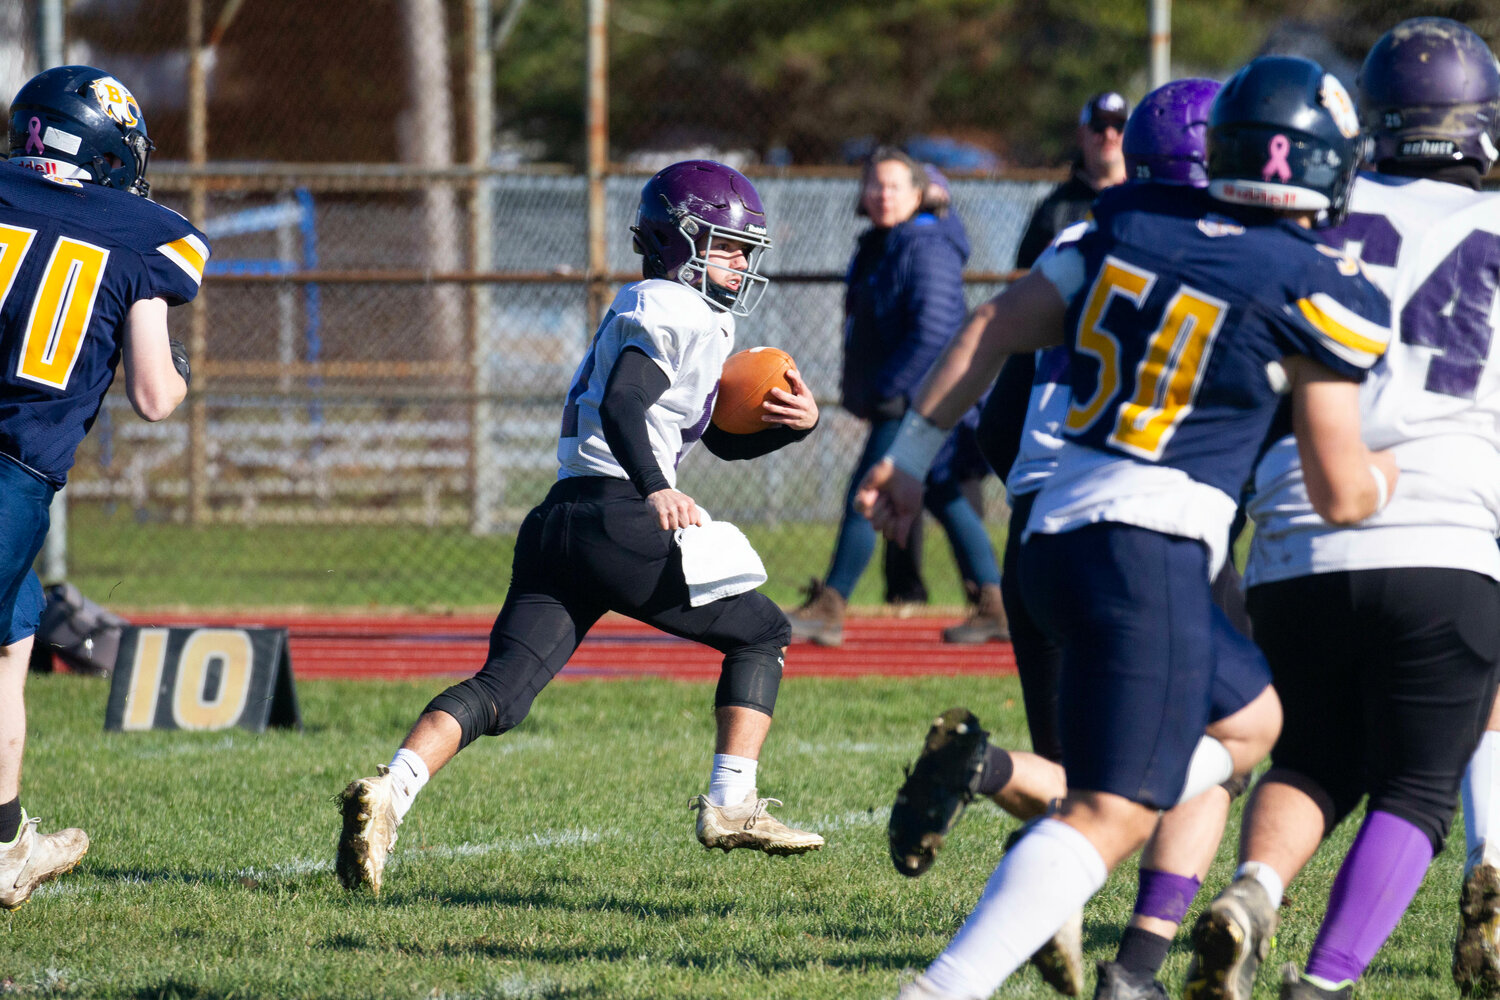 Mt. Hope's Riley Howland gains yards for the Huskies.